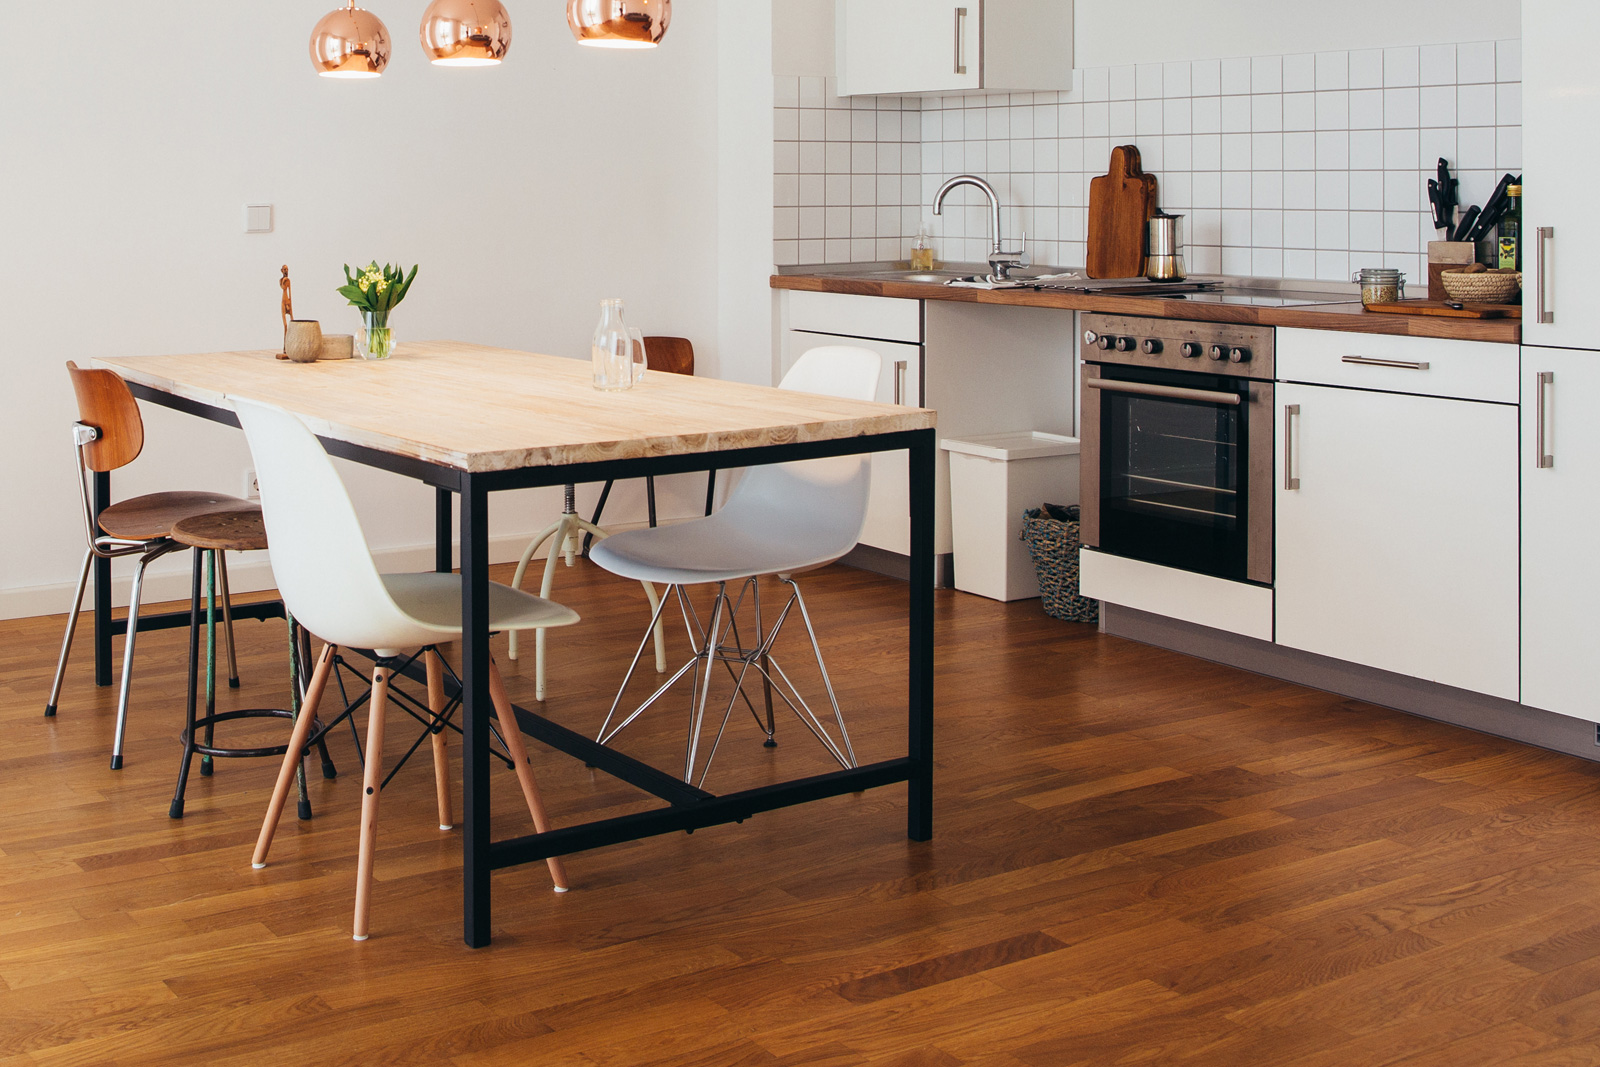 Kitchen flooring options for choose